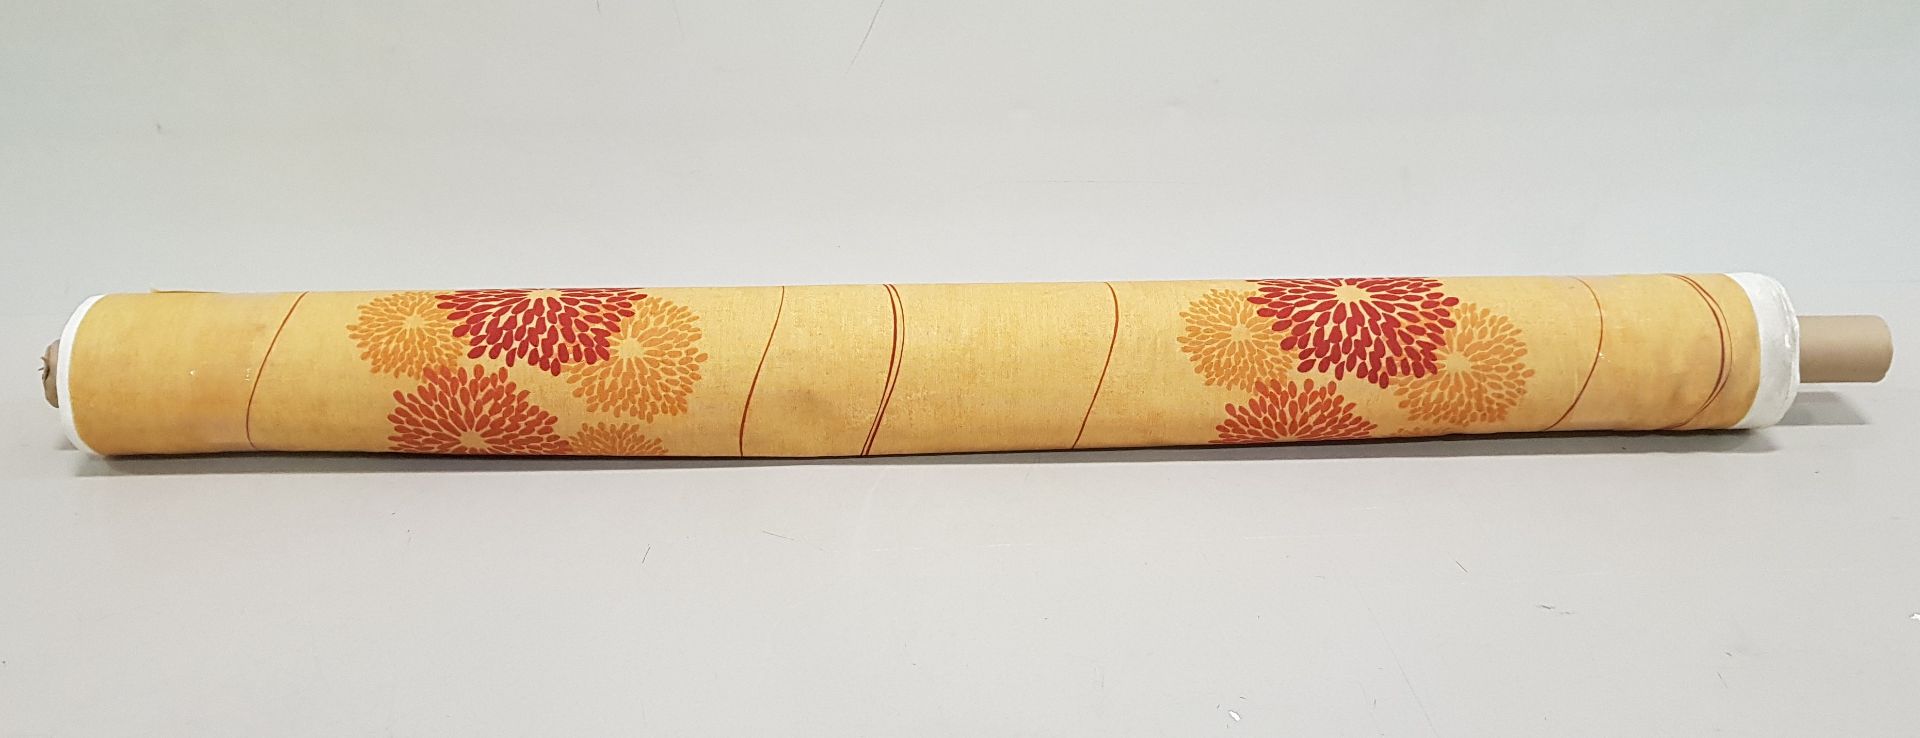 1 X ROLL OF FABRIC IN ORANGE AND RED FLORAL DESIGN -LENGTH 27 M - £12.99 / M - TOTAL £350.73